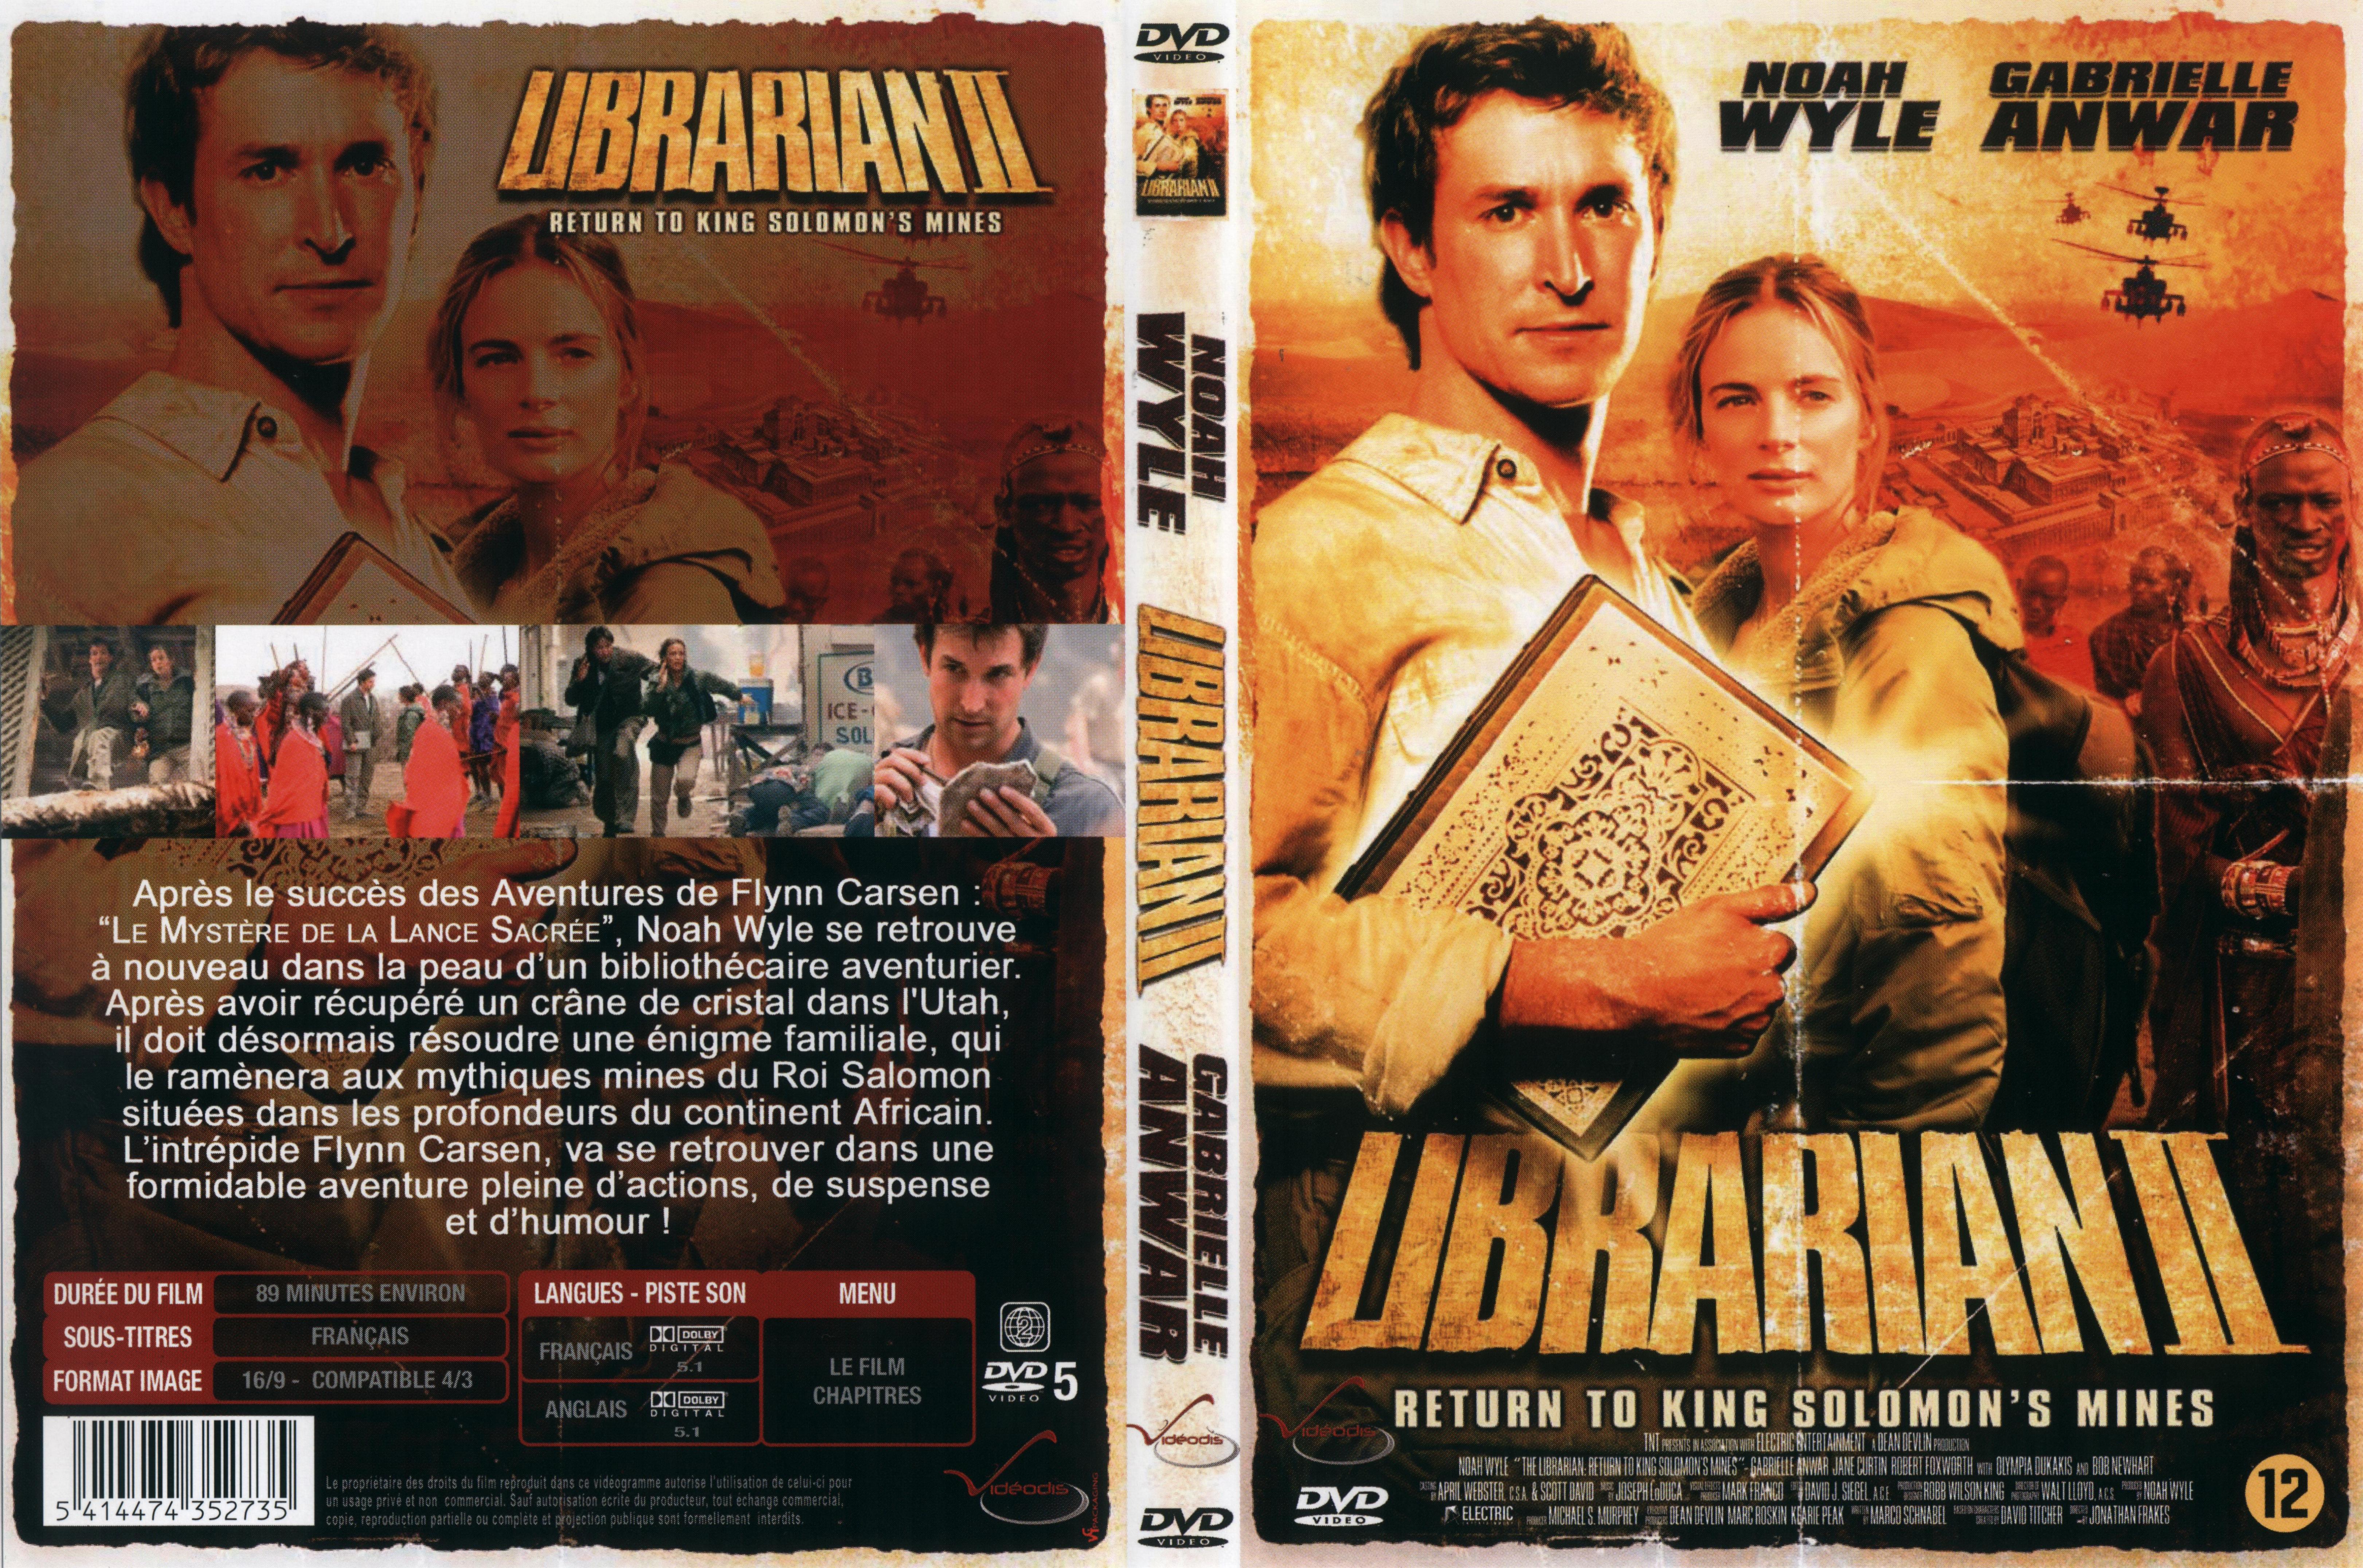 Jaquette DVD The librarian 2